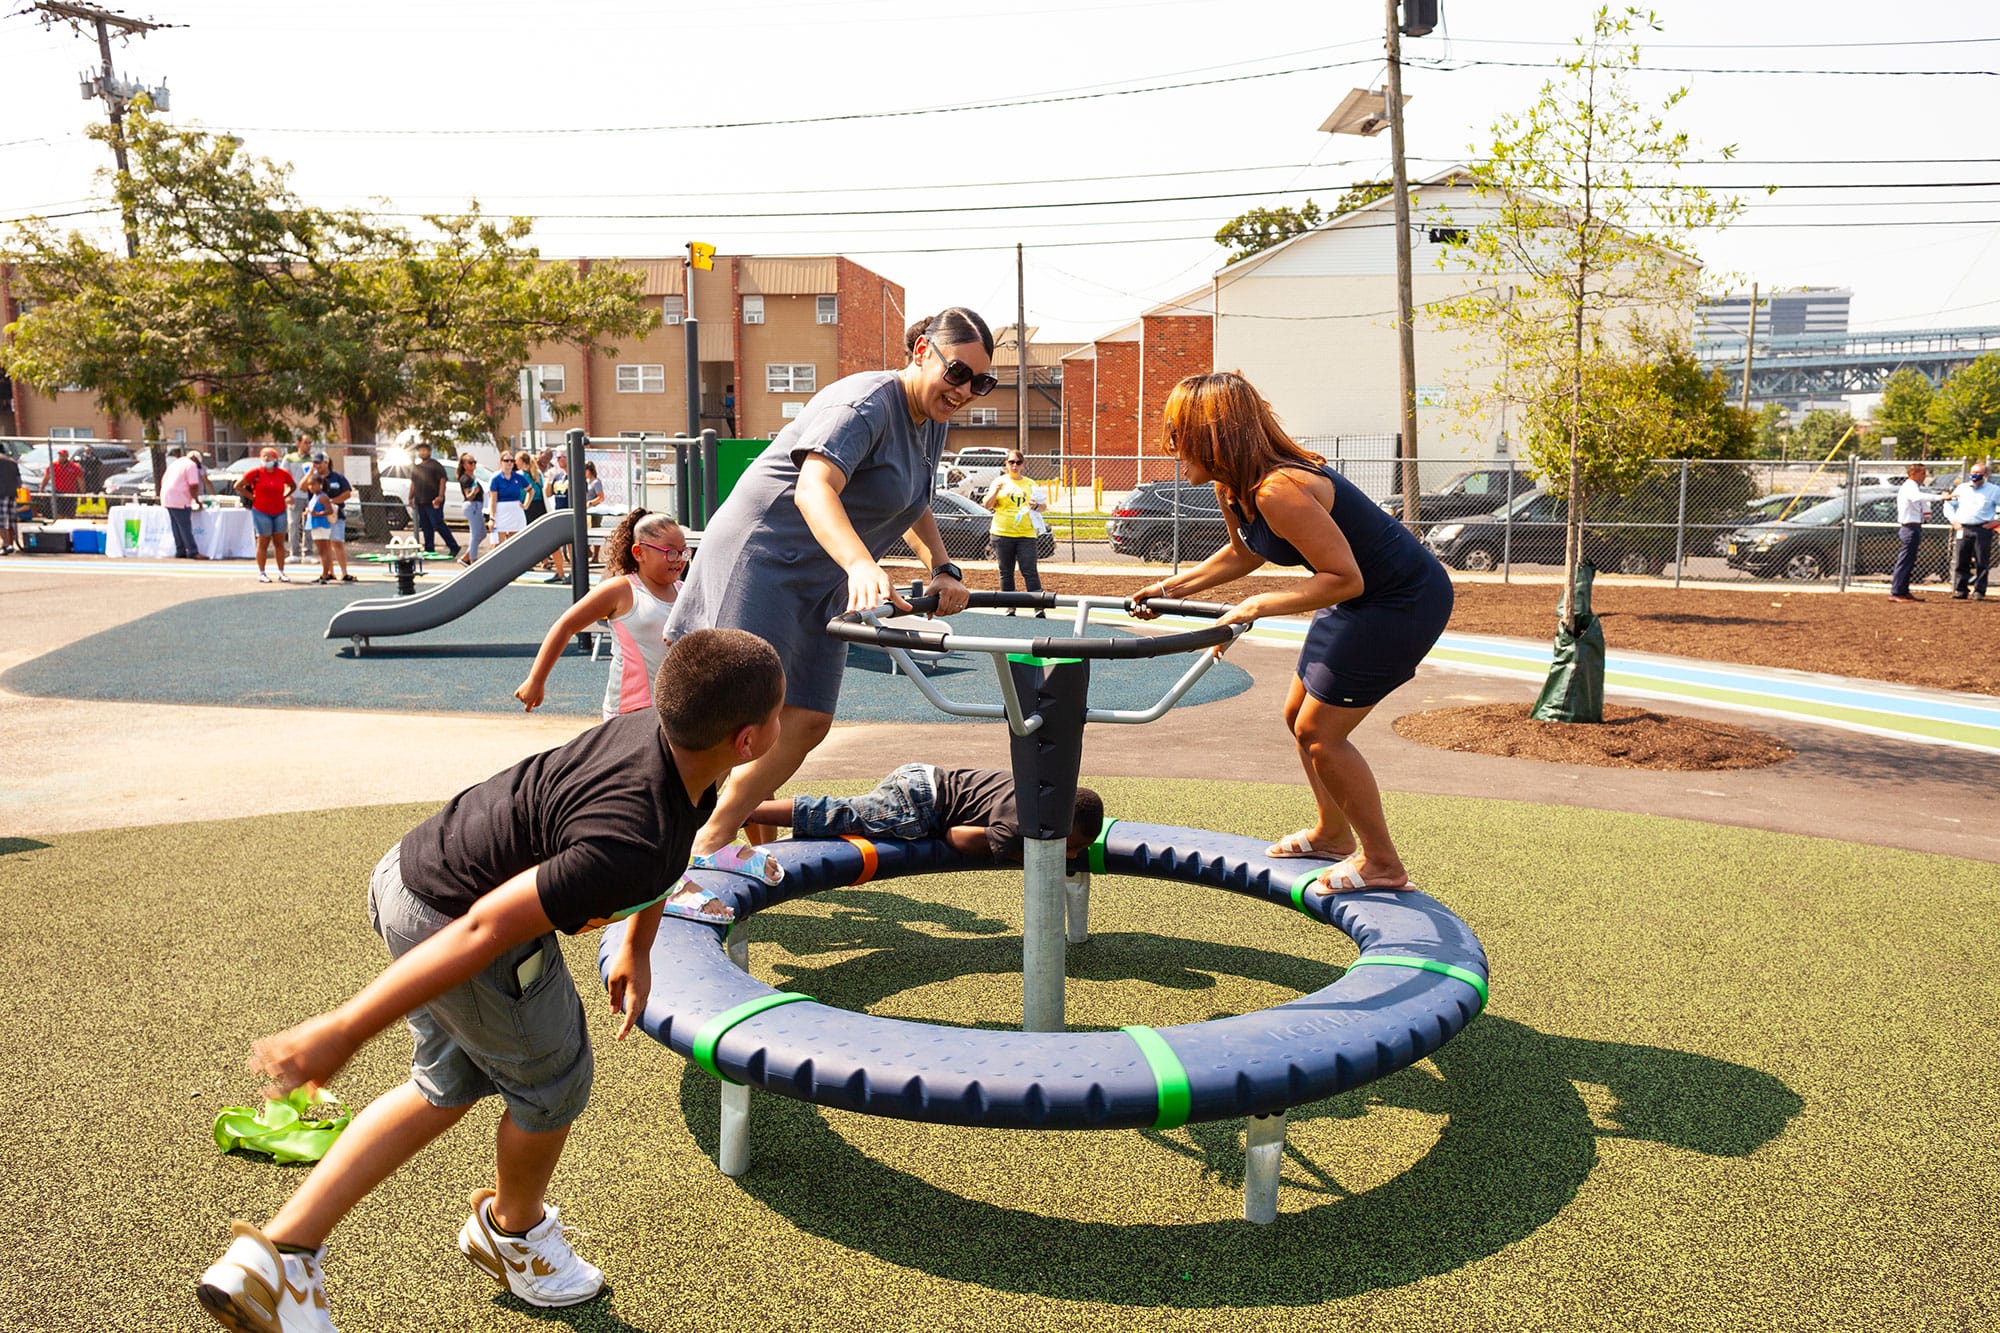 A group of people playing on a playground.